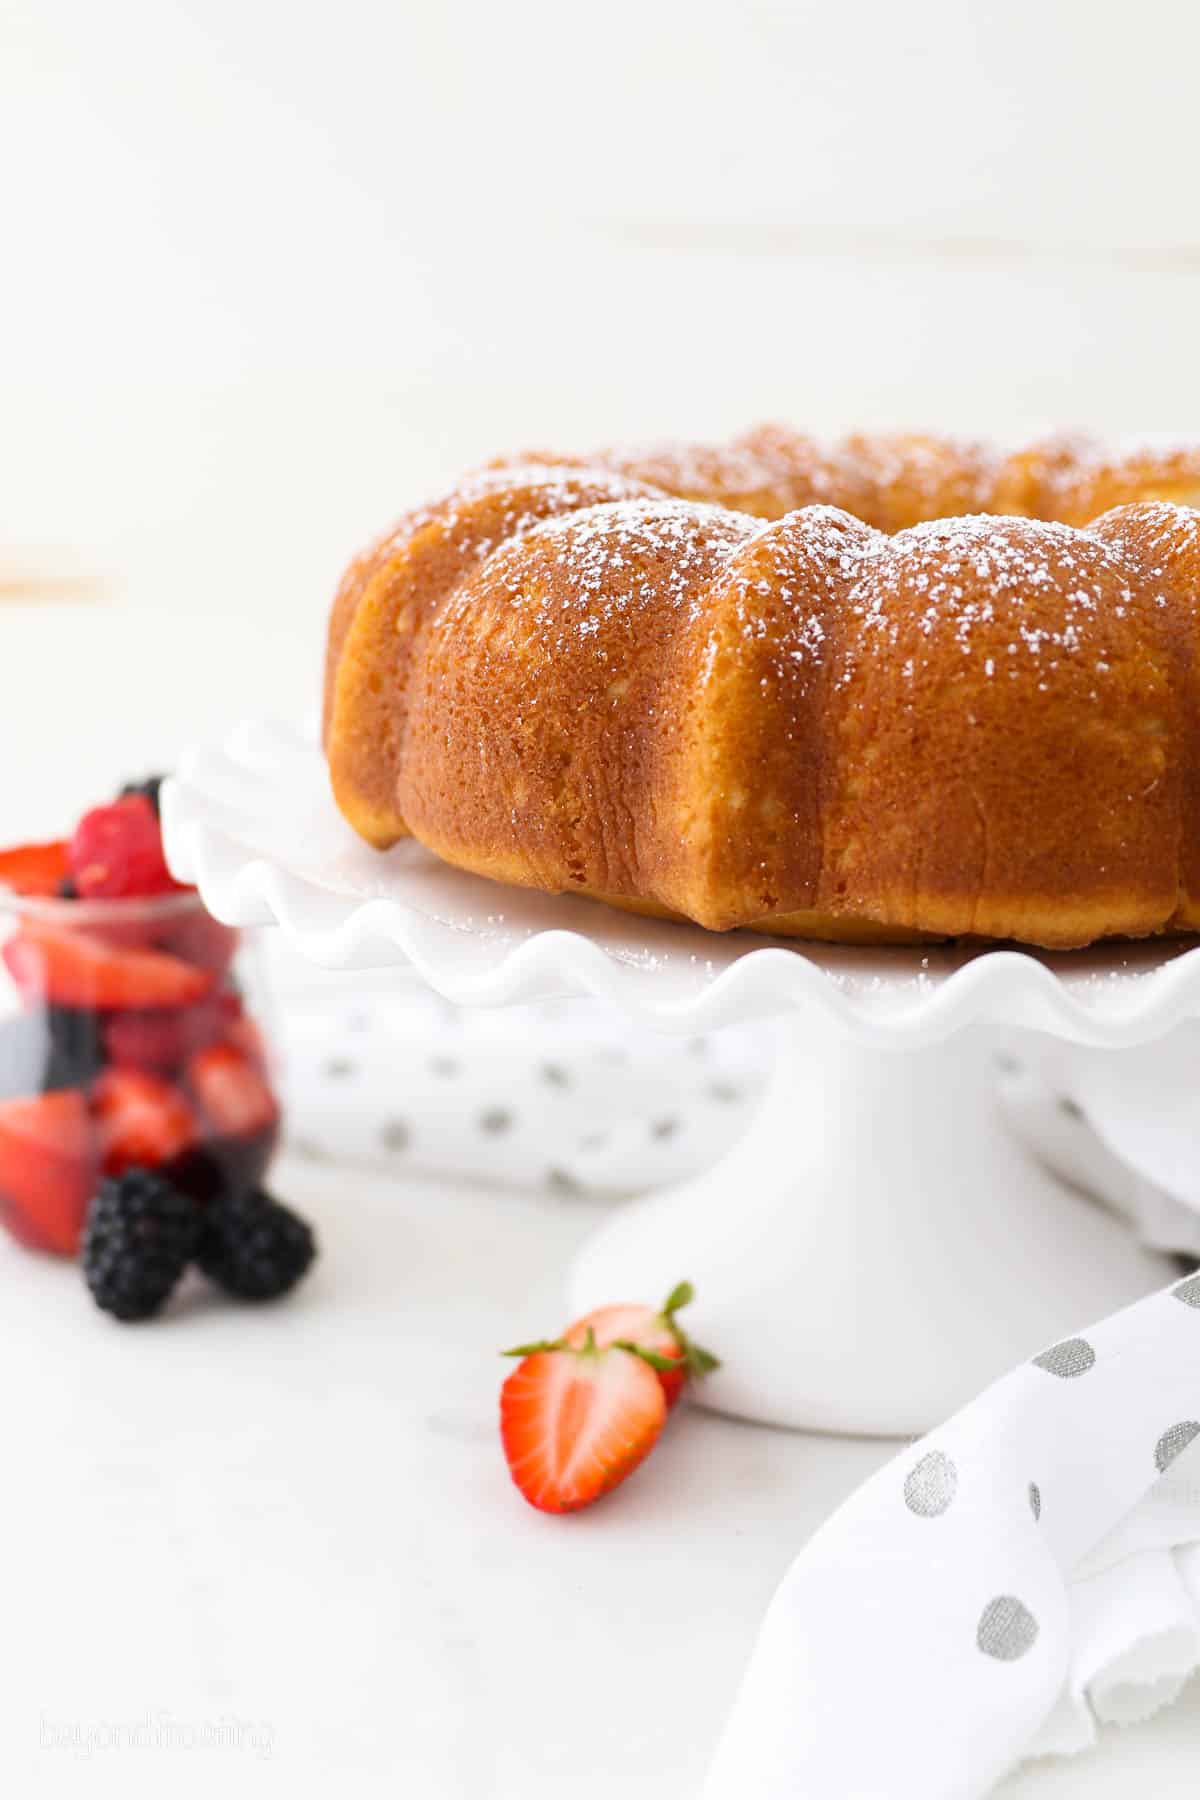 Vanilla bundt cake on a white cake stand on a countertop next to a jar of fresh berries.